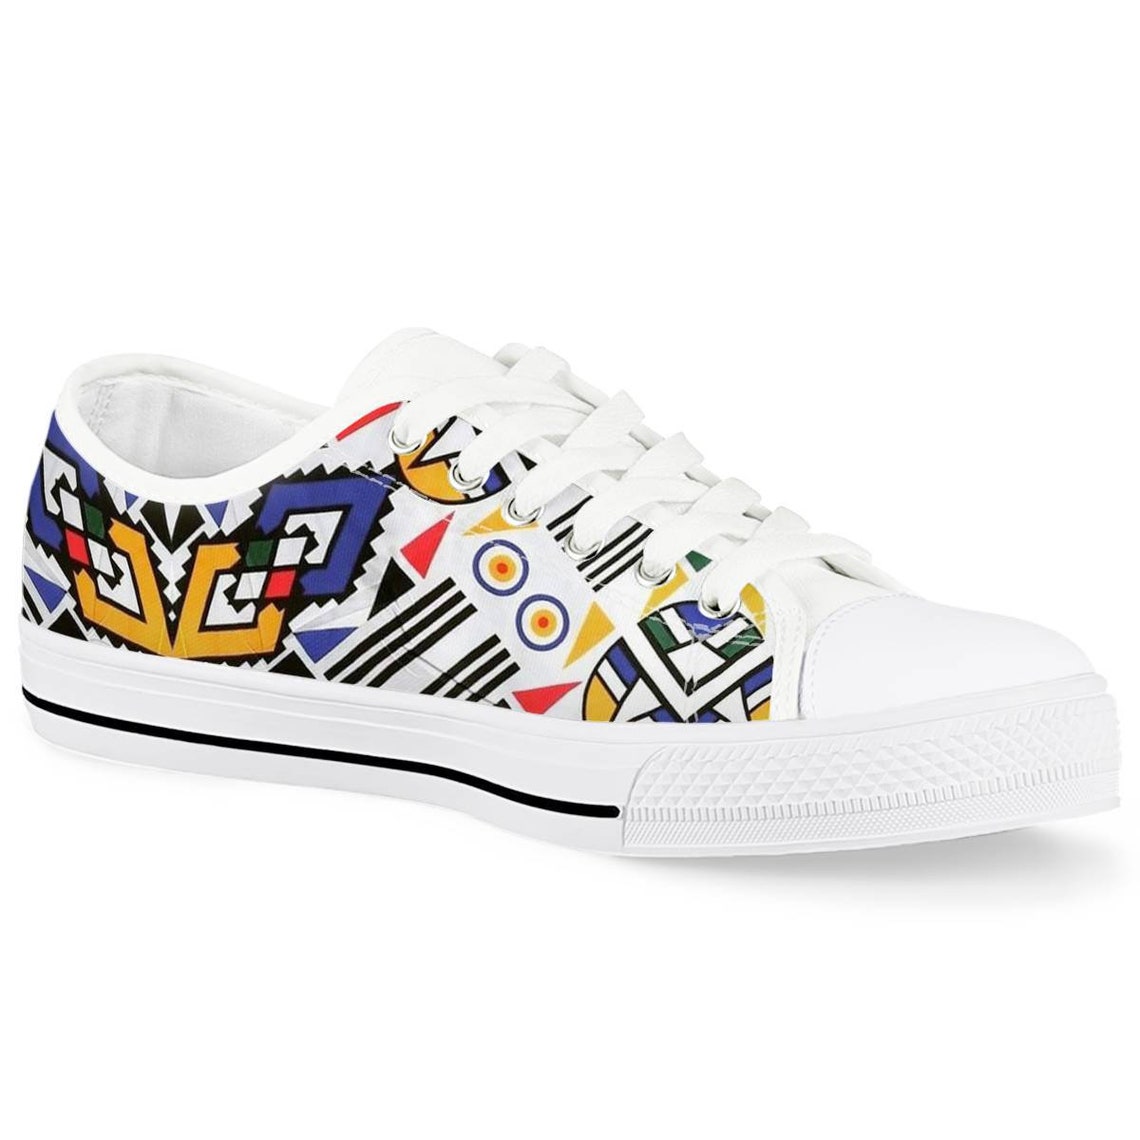 Ndebele Design Unisex Low Tops Shoes | Etsy